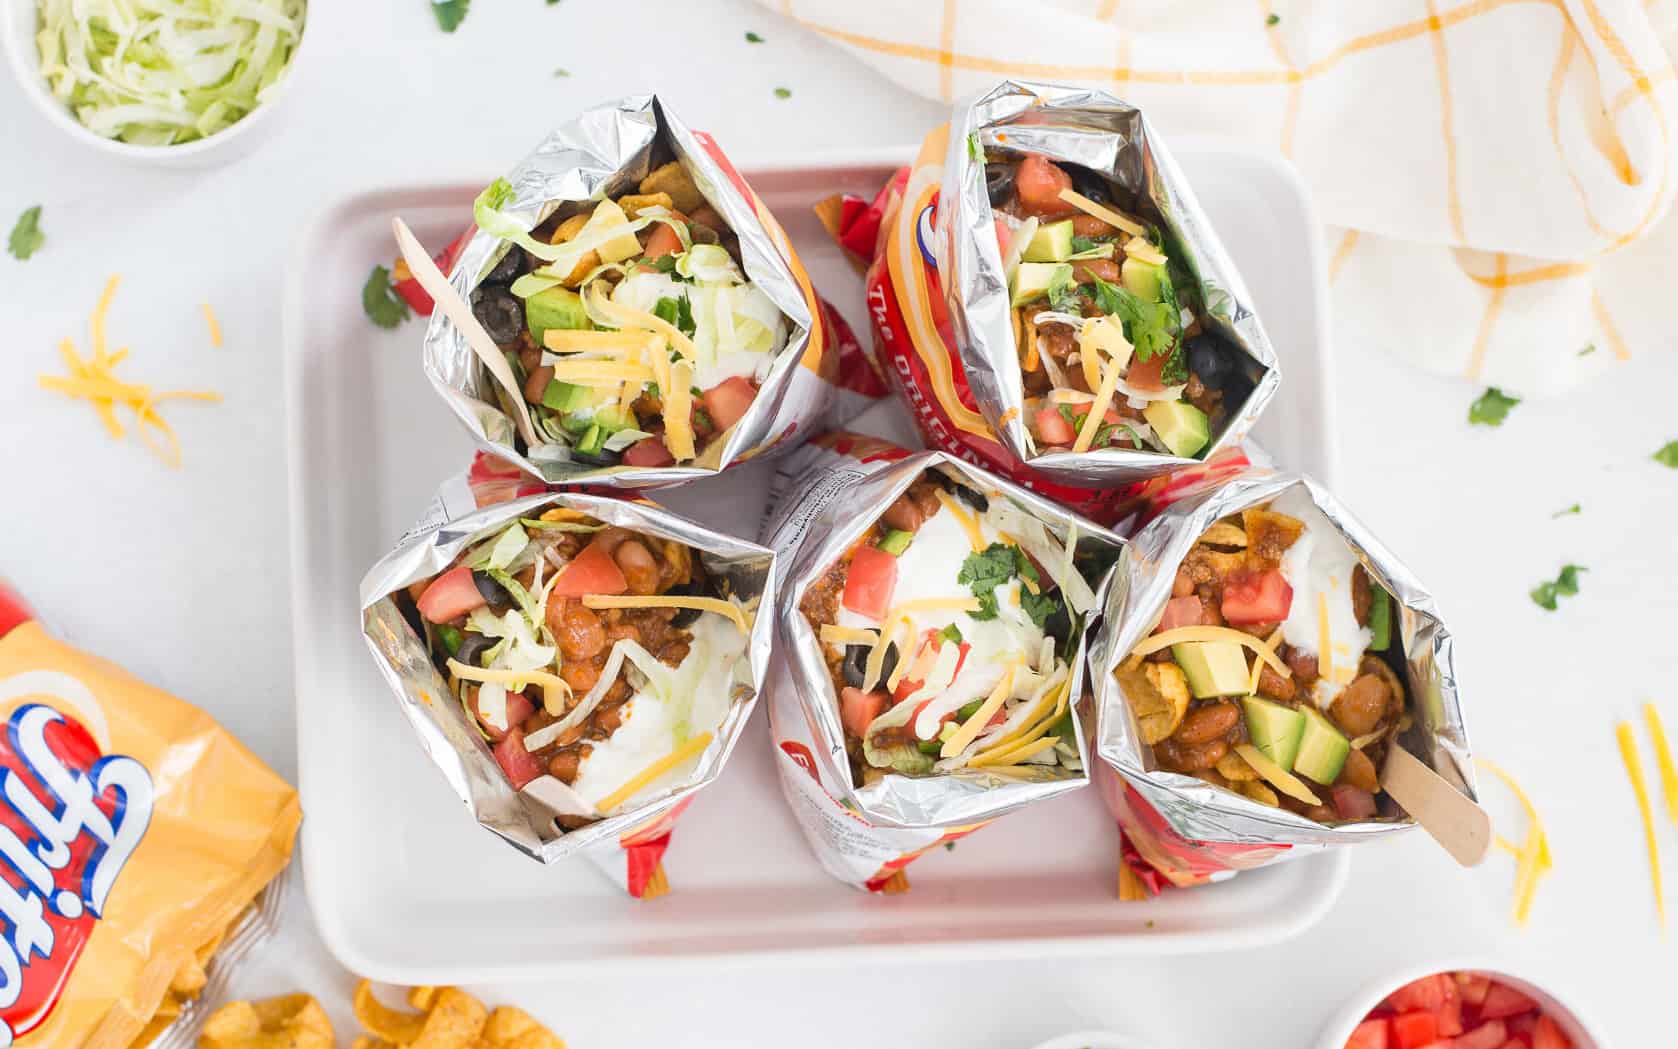 5 bags of walking tacos on a white platter with white bowls filled with lettuce, tomatoes, green onions around it with an open bag of Fritos next to it.